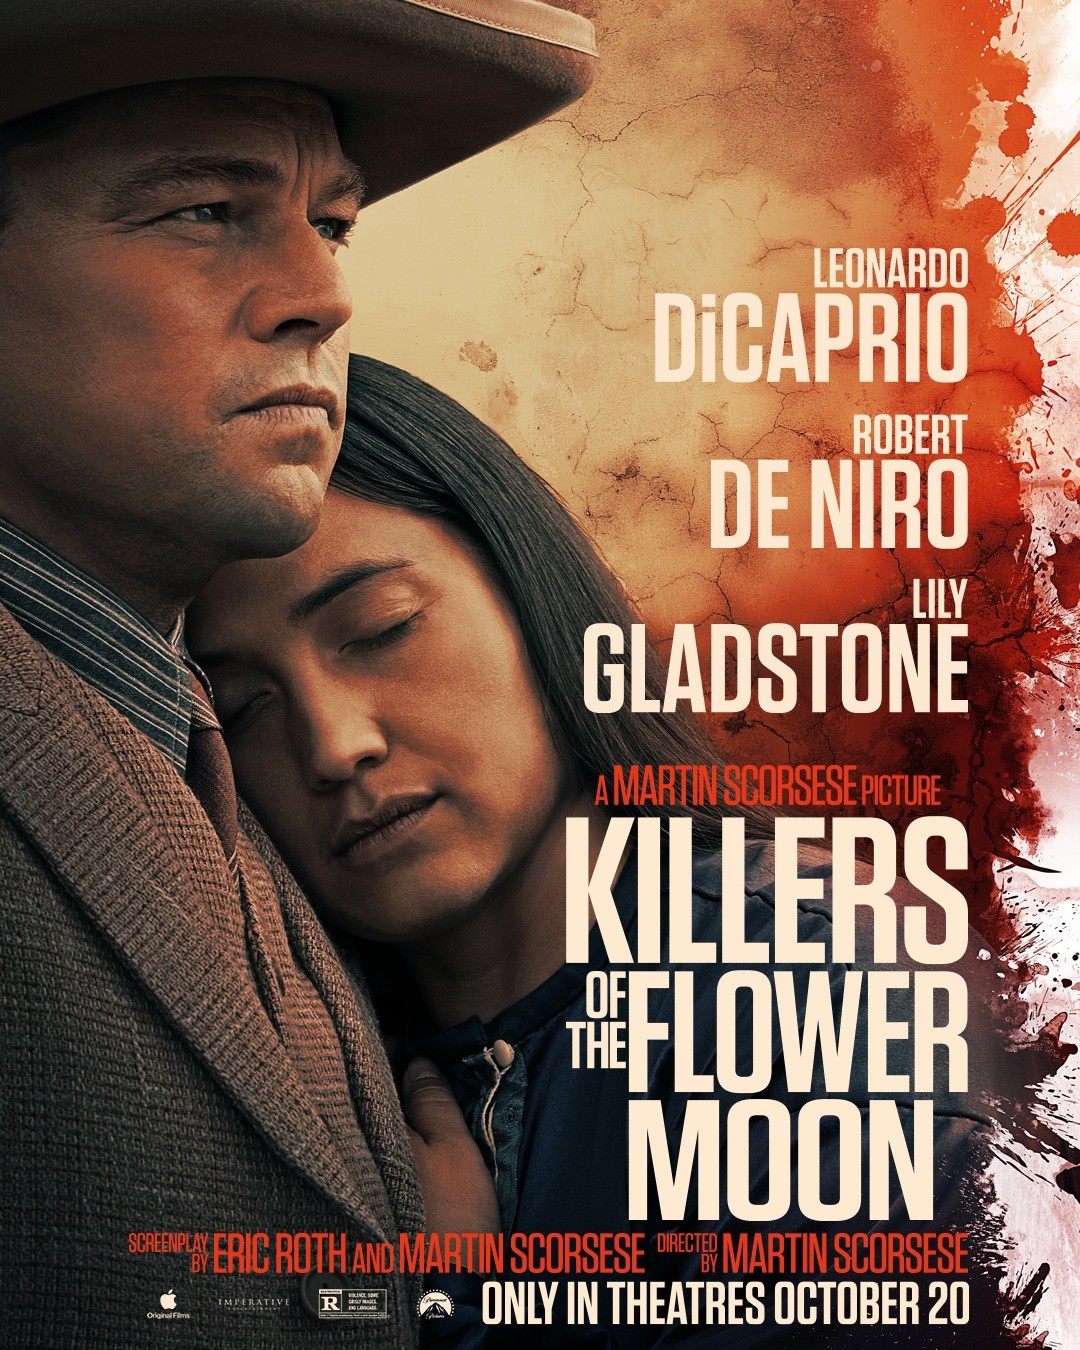 All About 'Killers of the Flower Moon